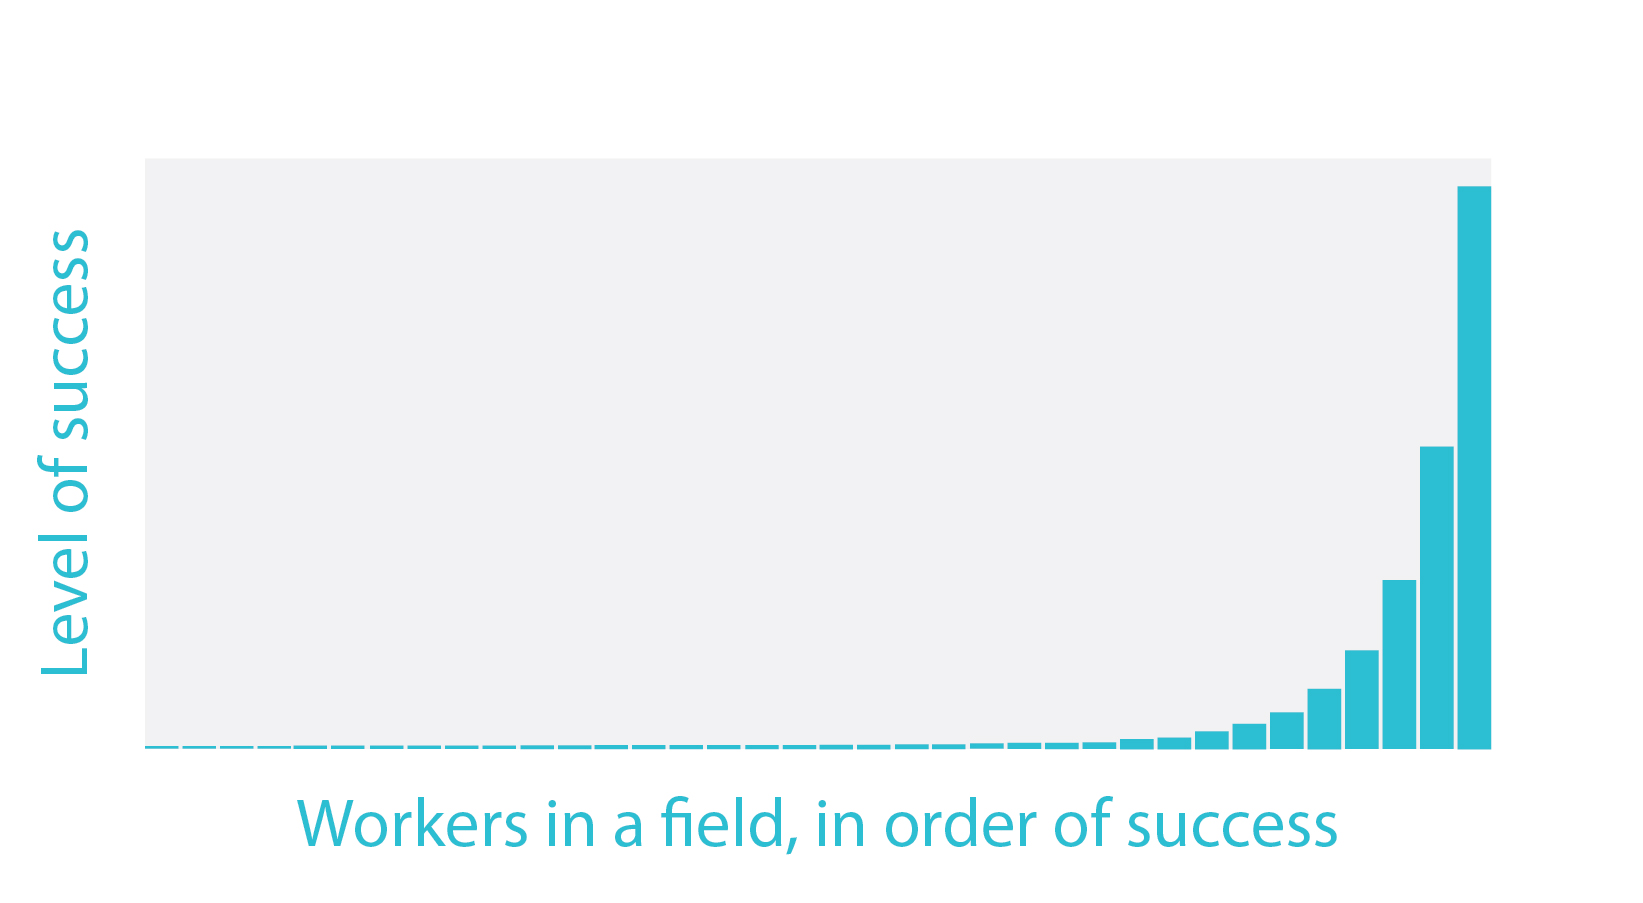 Log-normal distribution of success of workers in a field
 